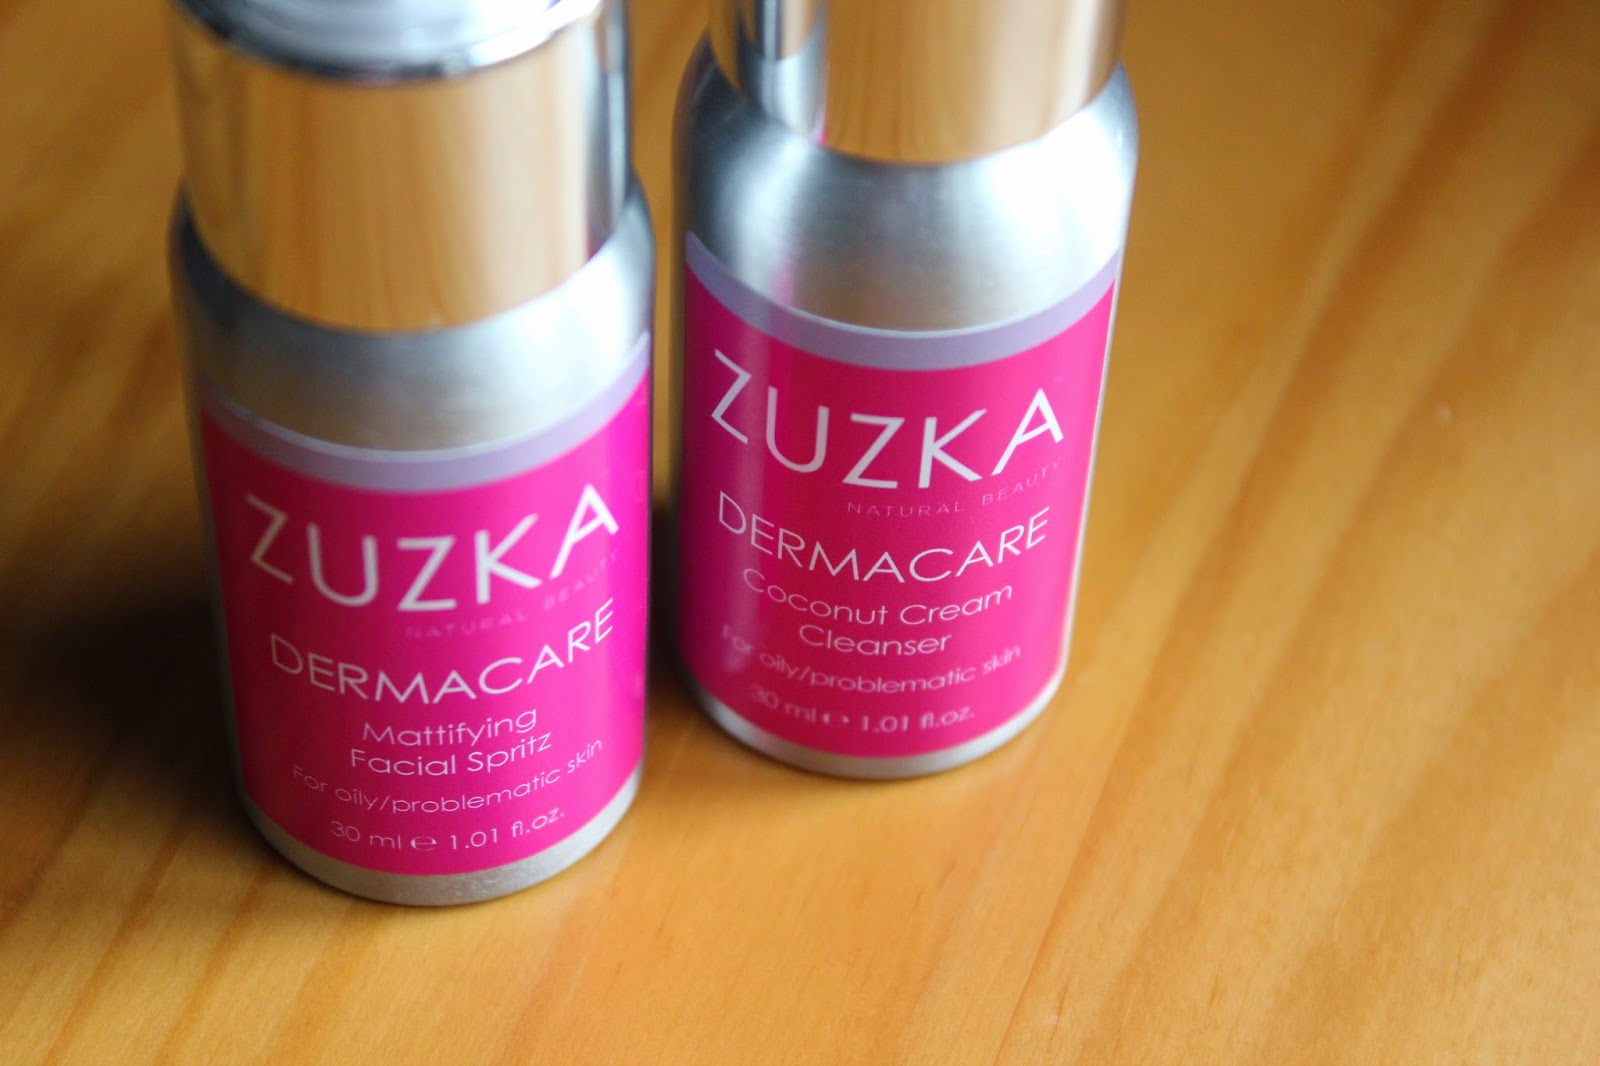 beauty-bbloggers-bloggers-zuzka-review-skincare-dermalogical-skin-products-cleanser